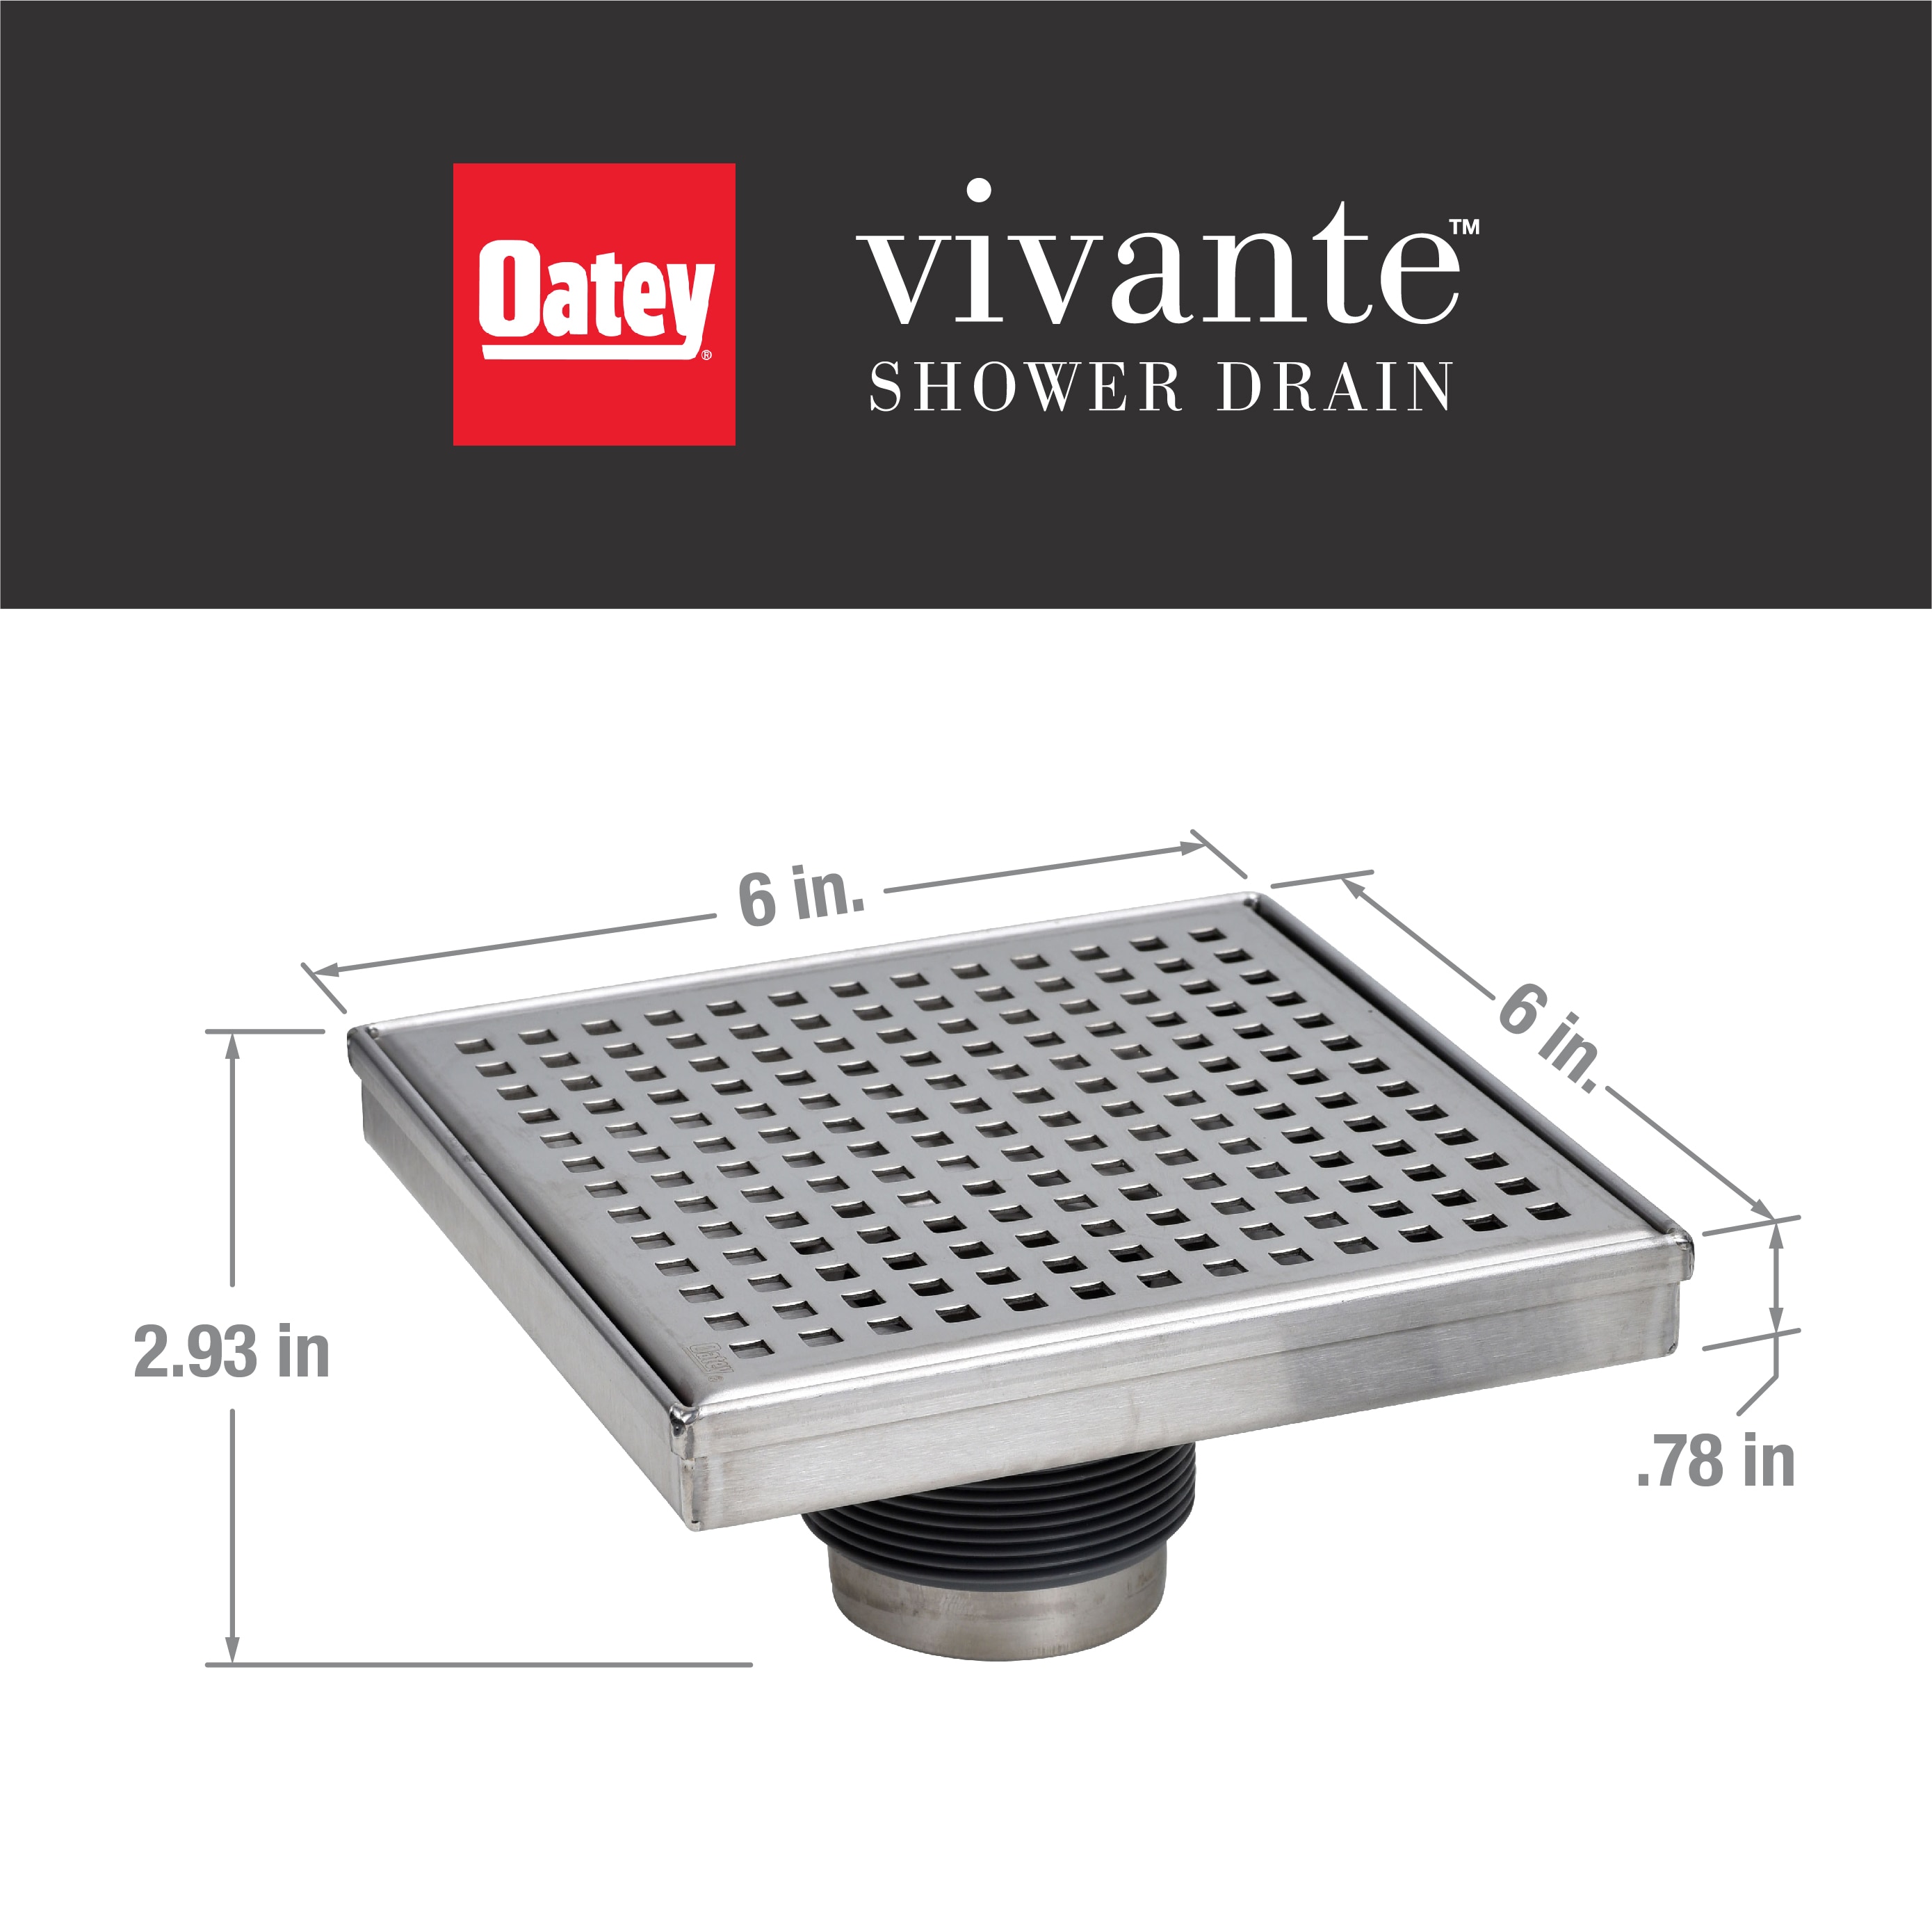 Satico Stainless Steel Square Shower Floor Drain with Square Pattern Drain Cover, Brushed Gold